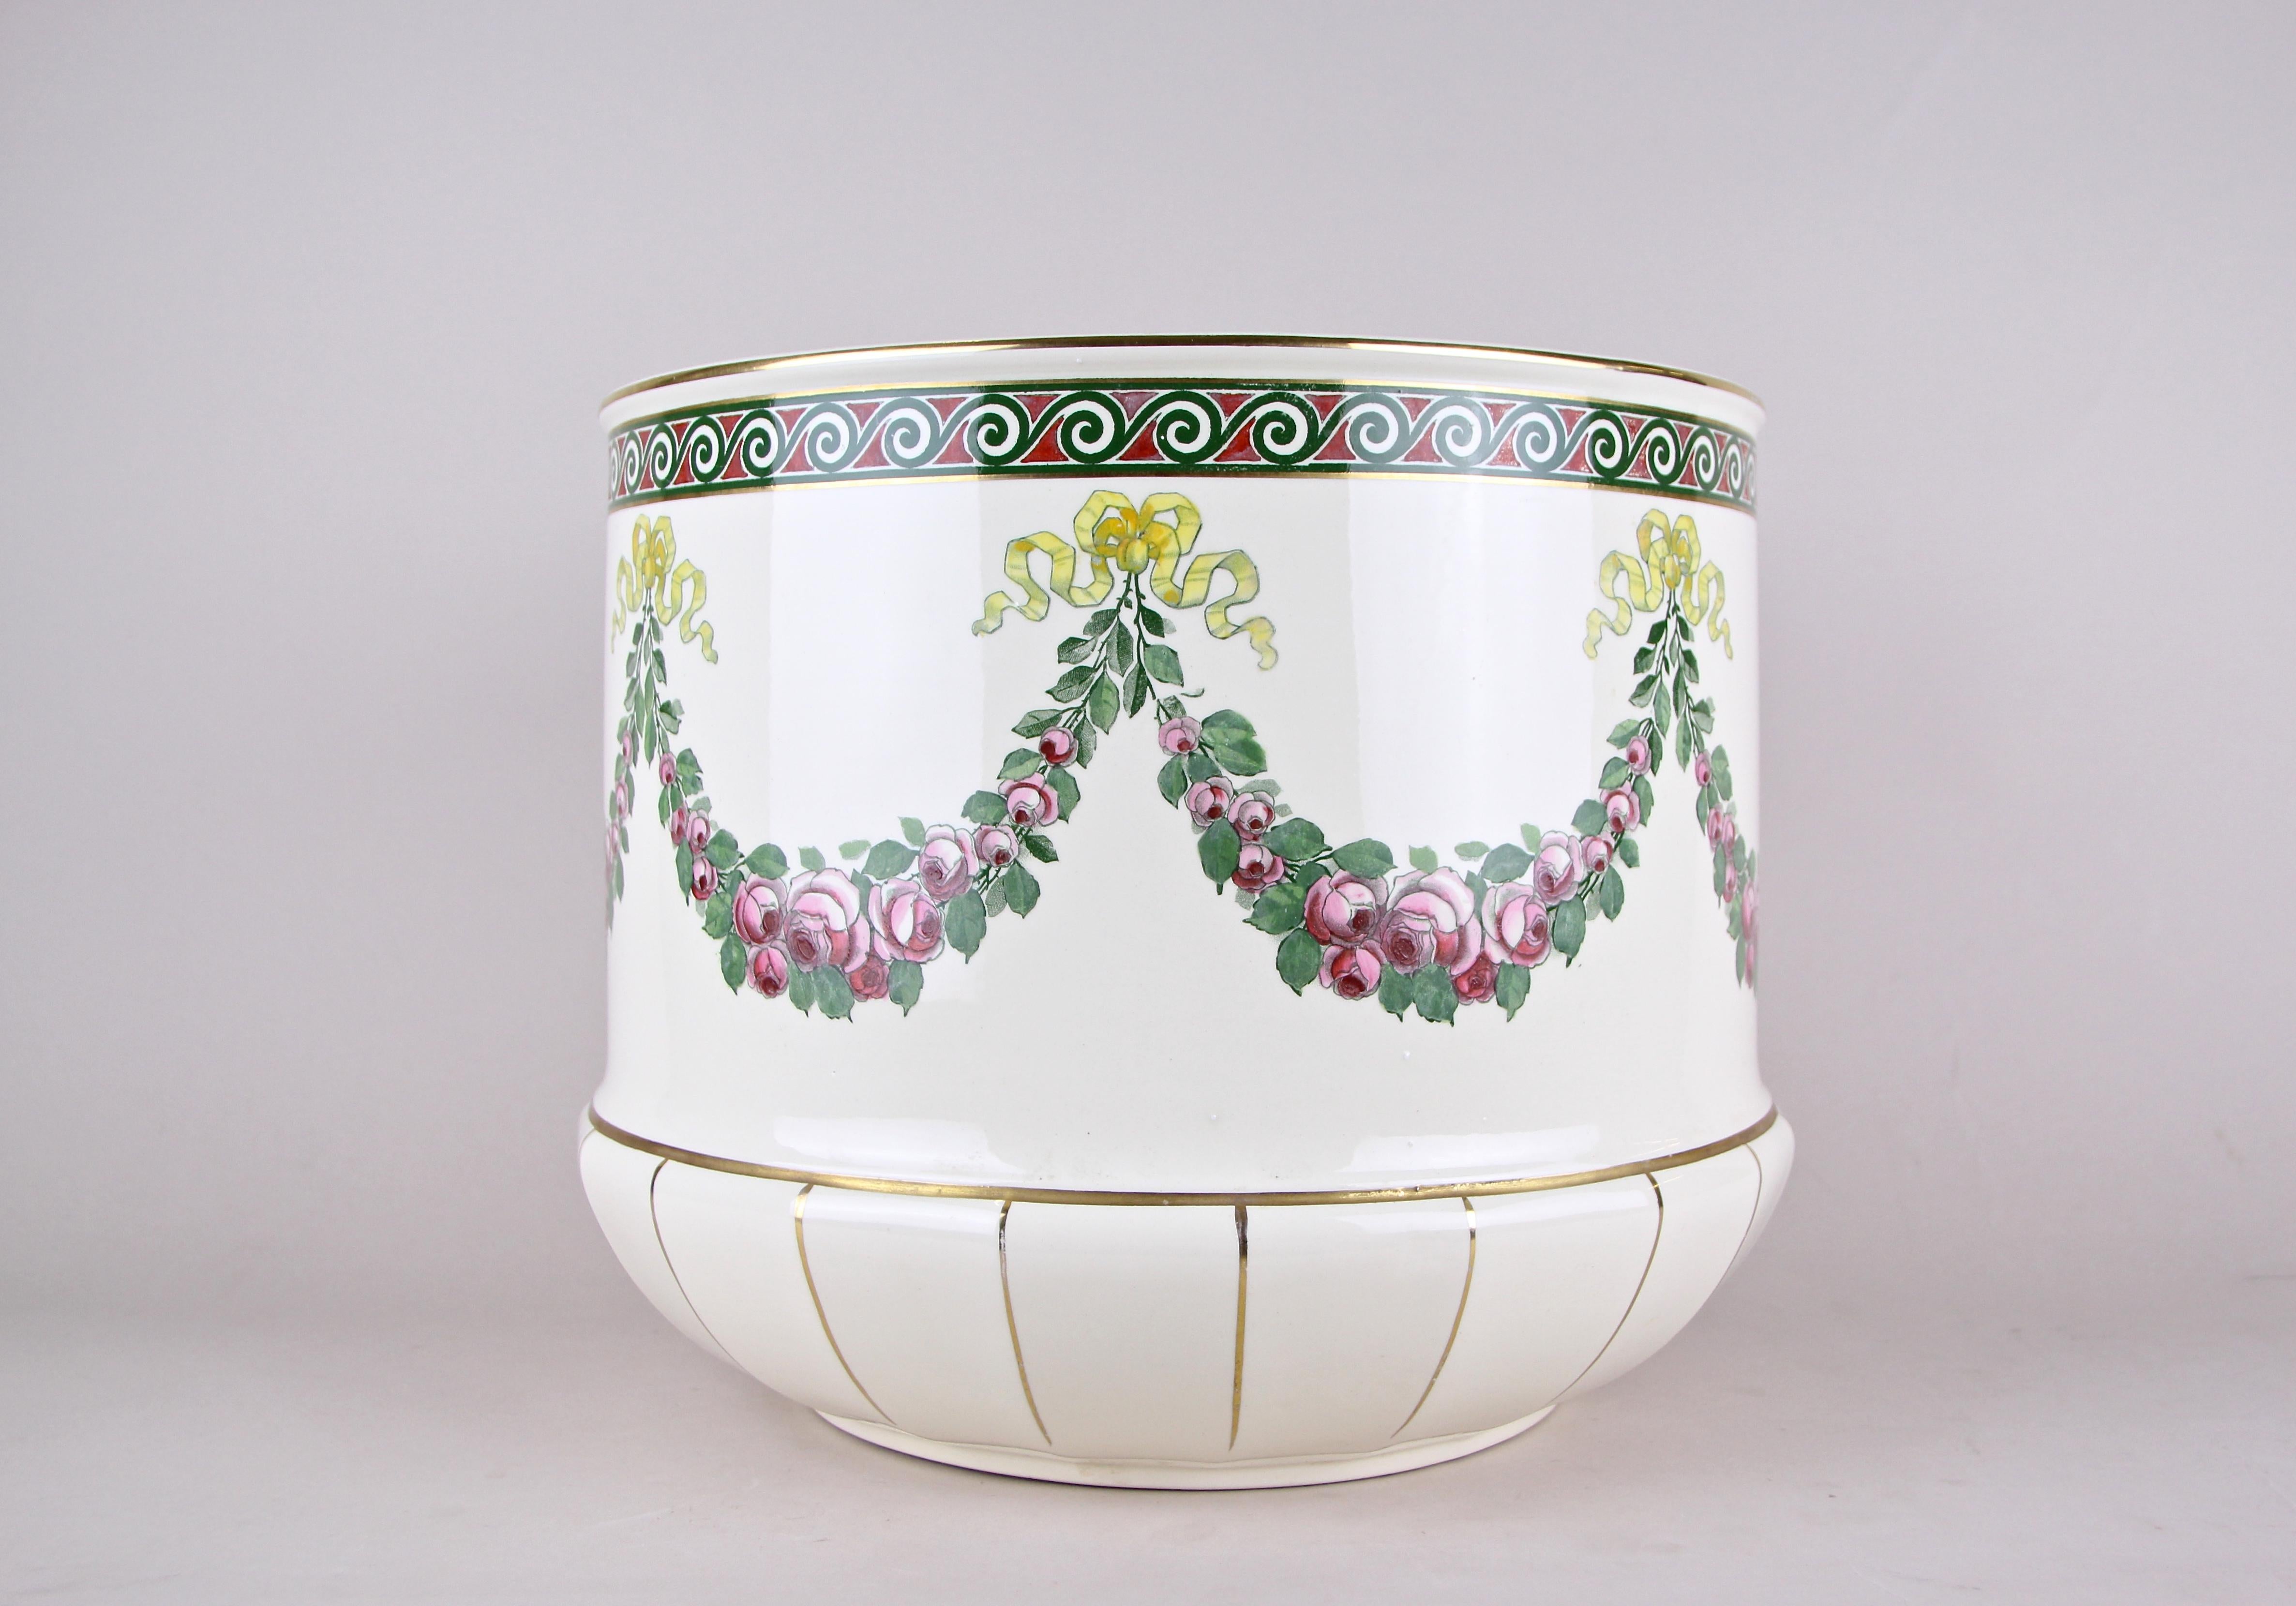 20th Century Large Cachepot by Villeroy Boch, Germany, circa 1918